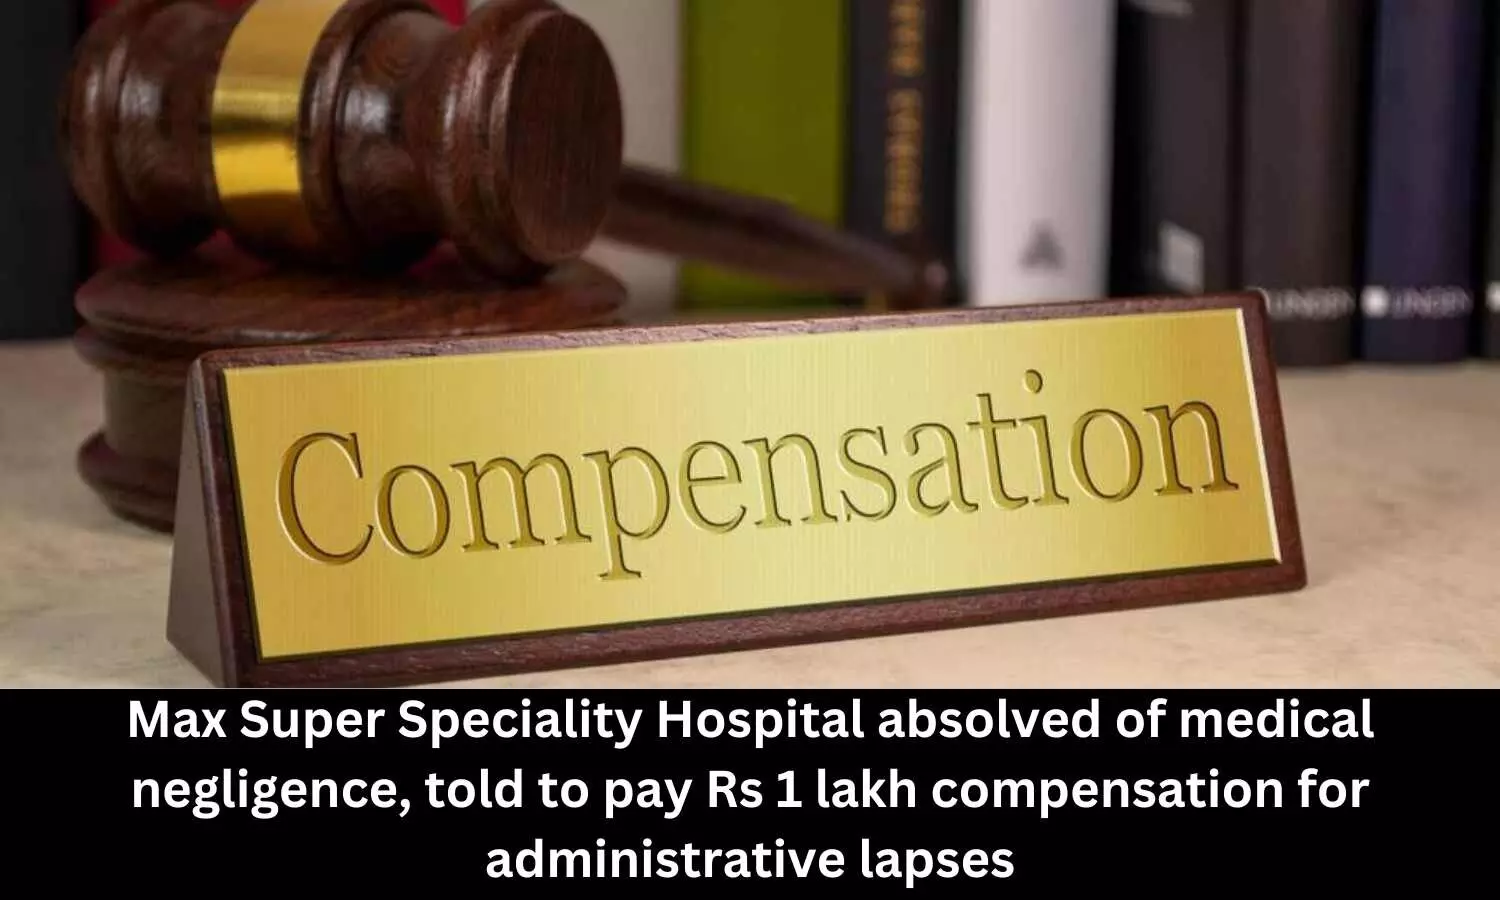 Max Super Speciality Hospital absolved of medical negligence, told to pay Rs 1 lakh compensation for administrative lapses